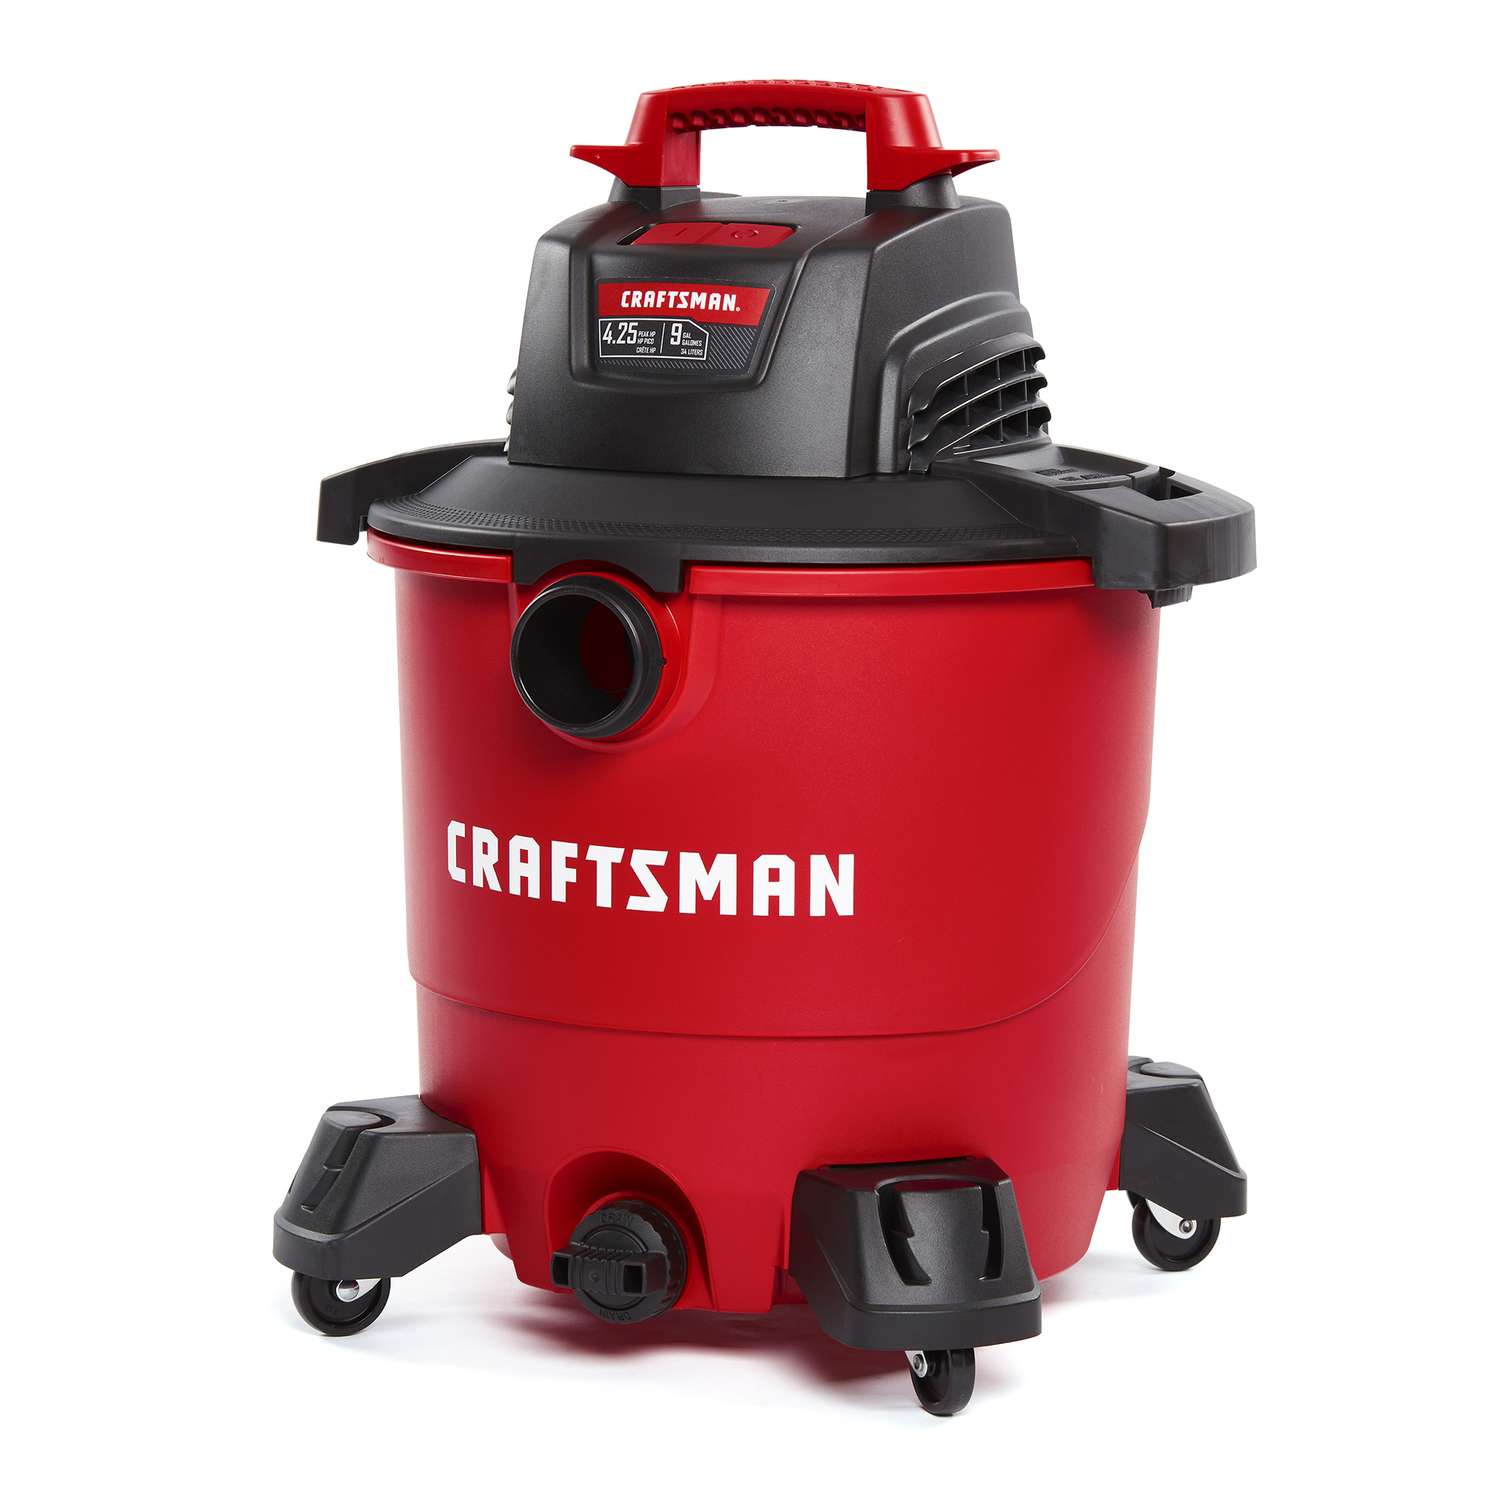 Craftsman 9 gal Corded Wet/Dry Vacuum 8.3 amps 120 V 4.25 HP